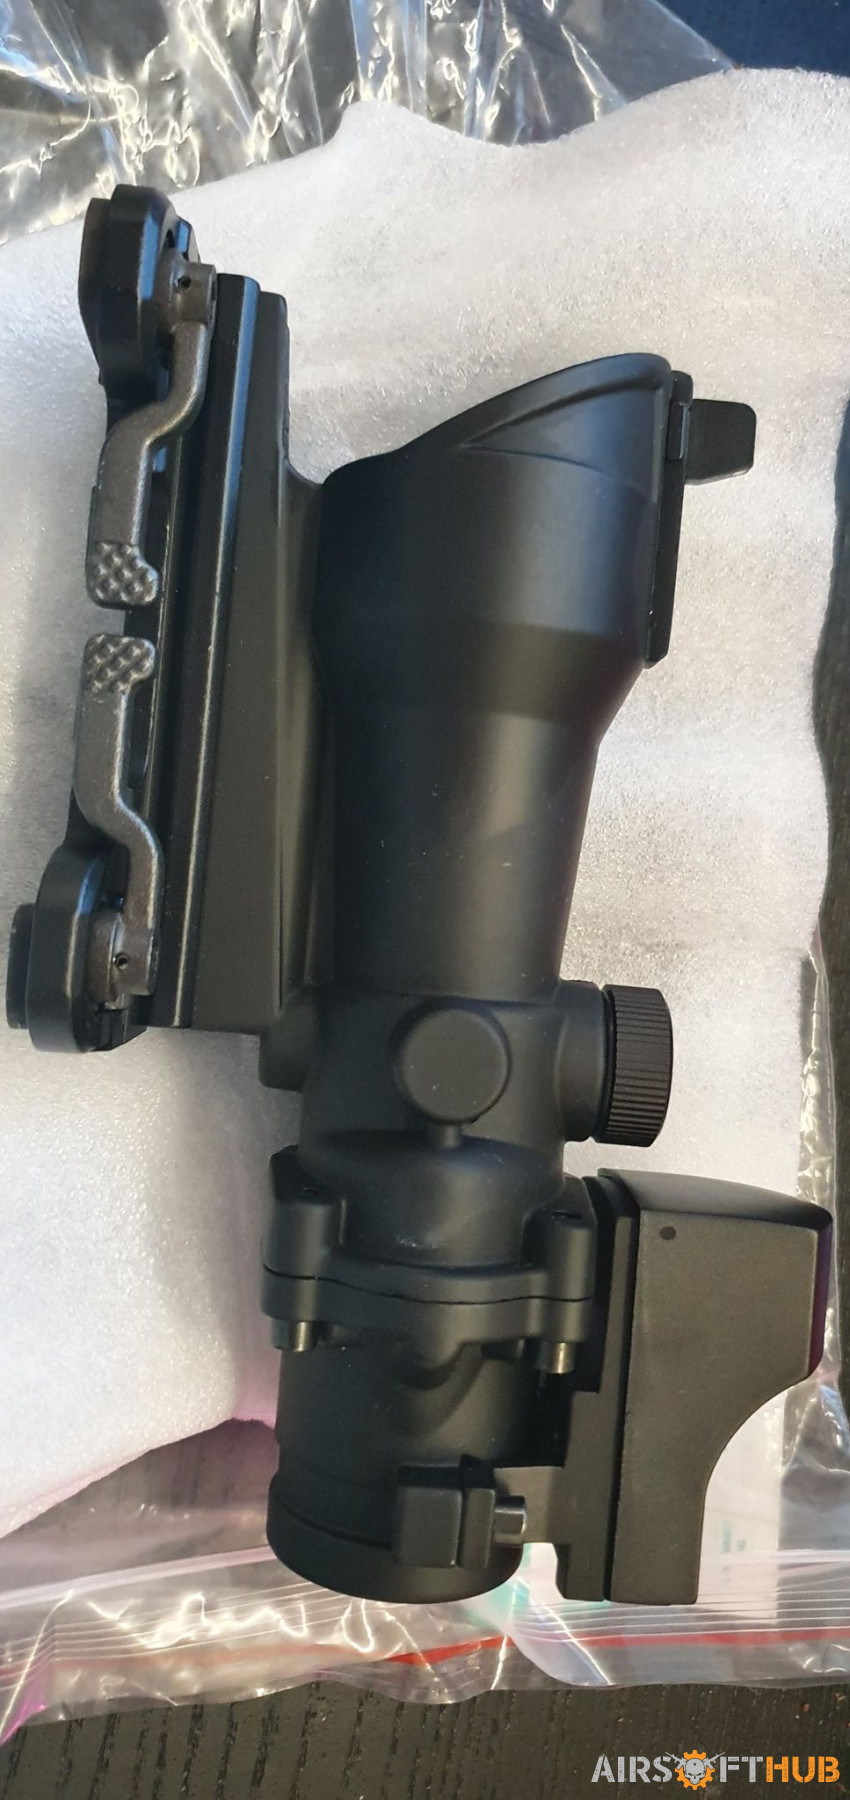 ACOG 4×32 Scope with QD Mount - Used airsoft equipment